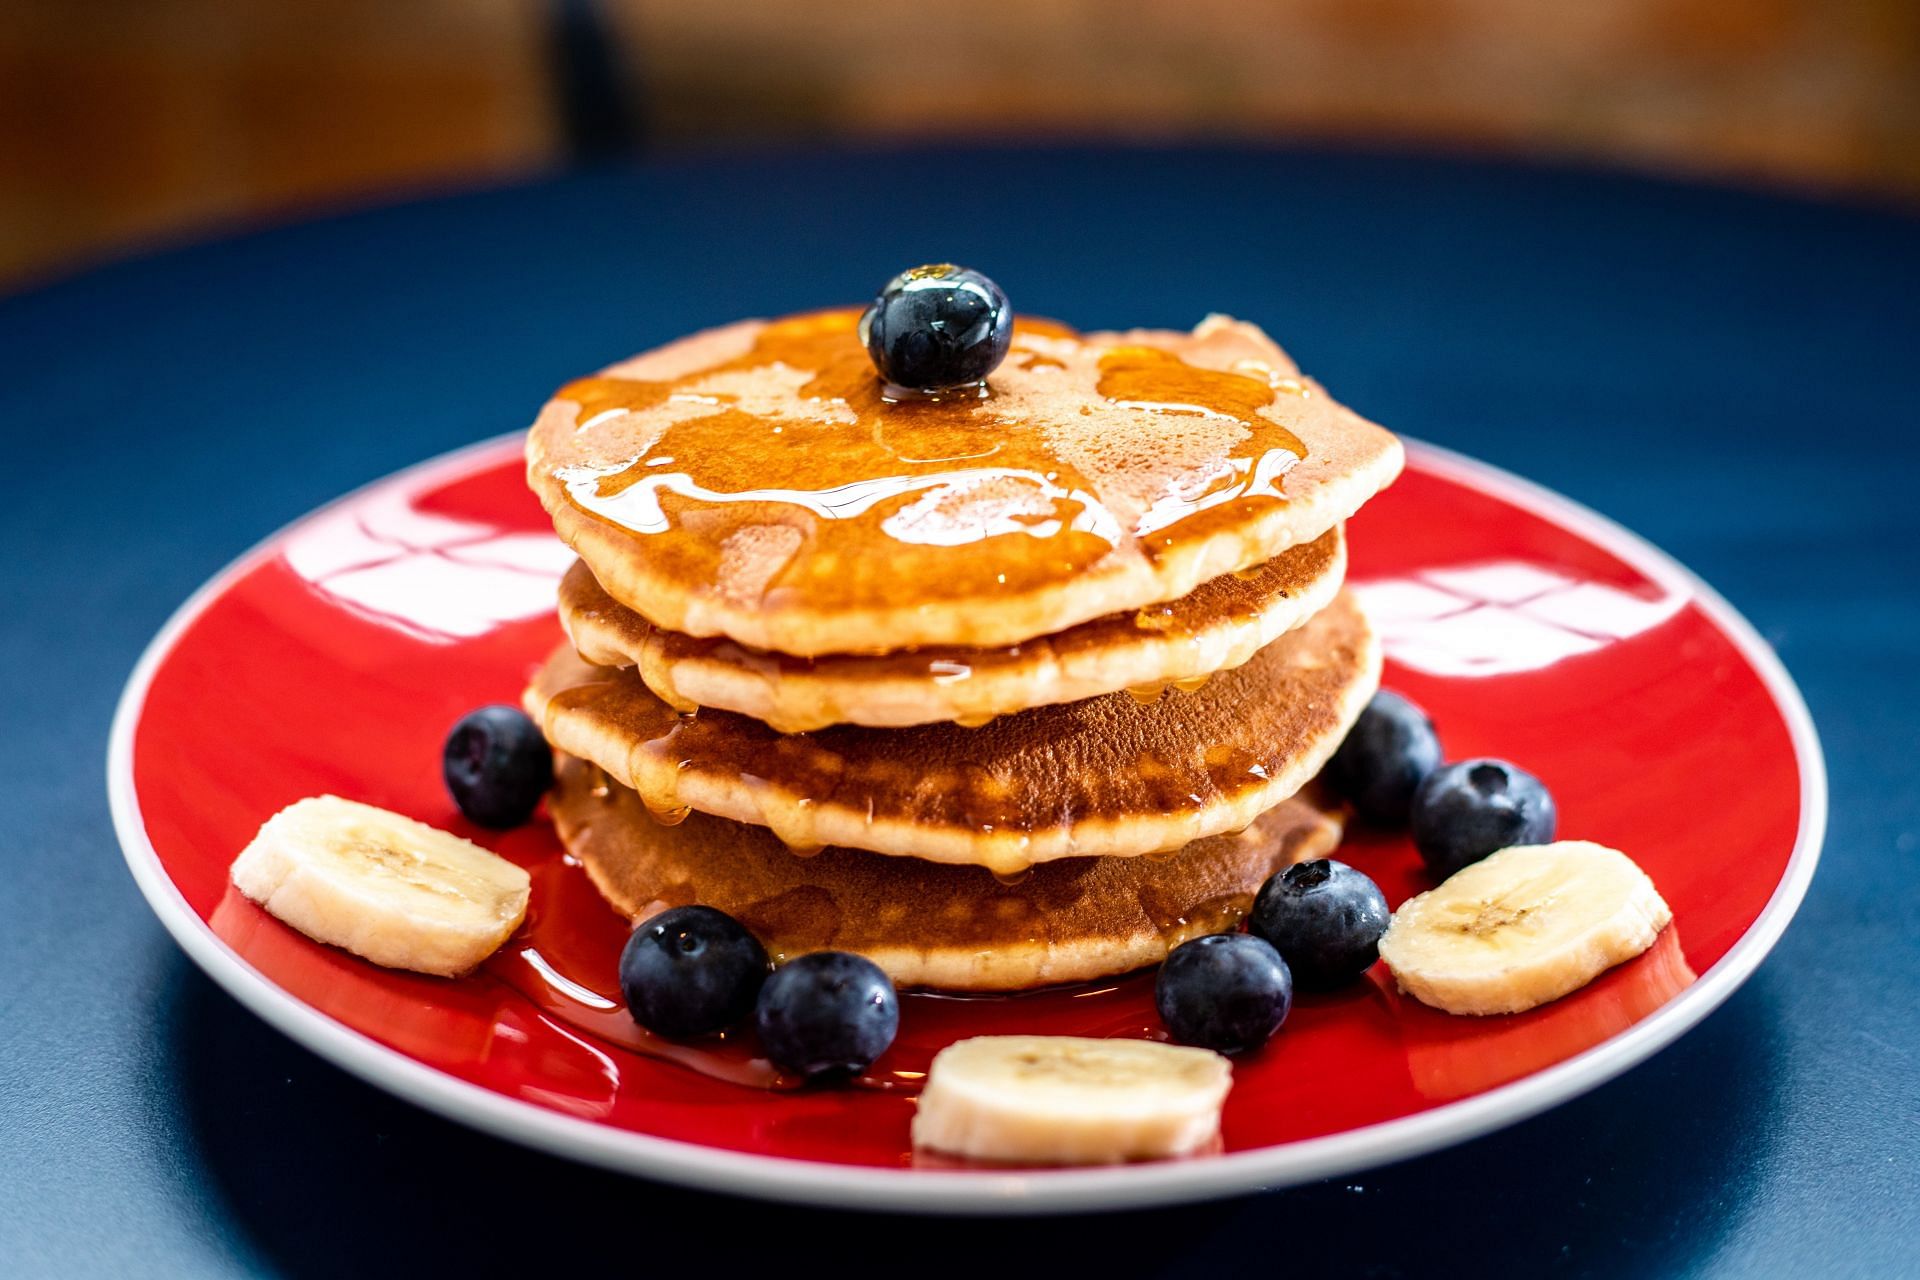 Protein Pancakes can be a healthy choice for breakfast (Image via Unsplash/nikldn)